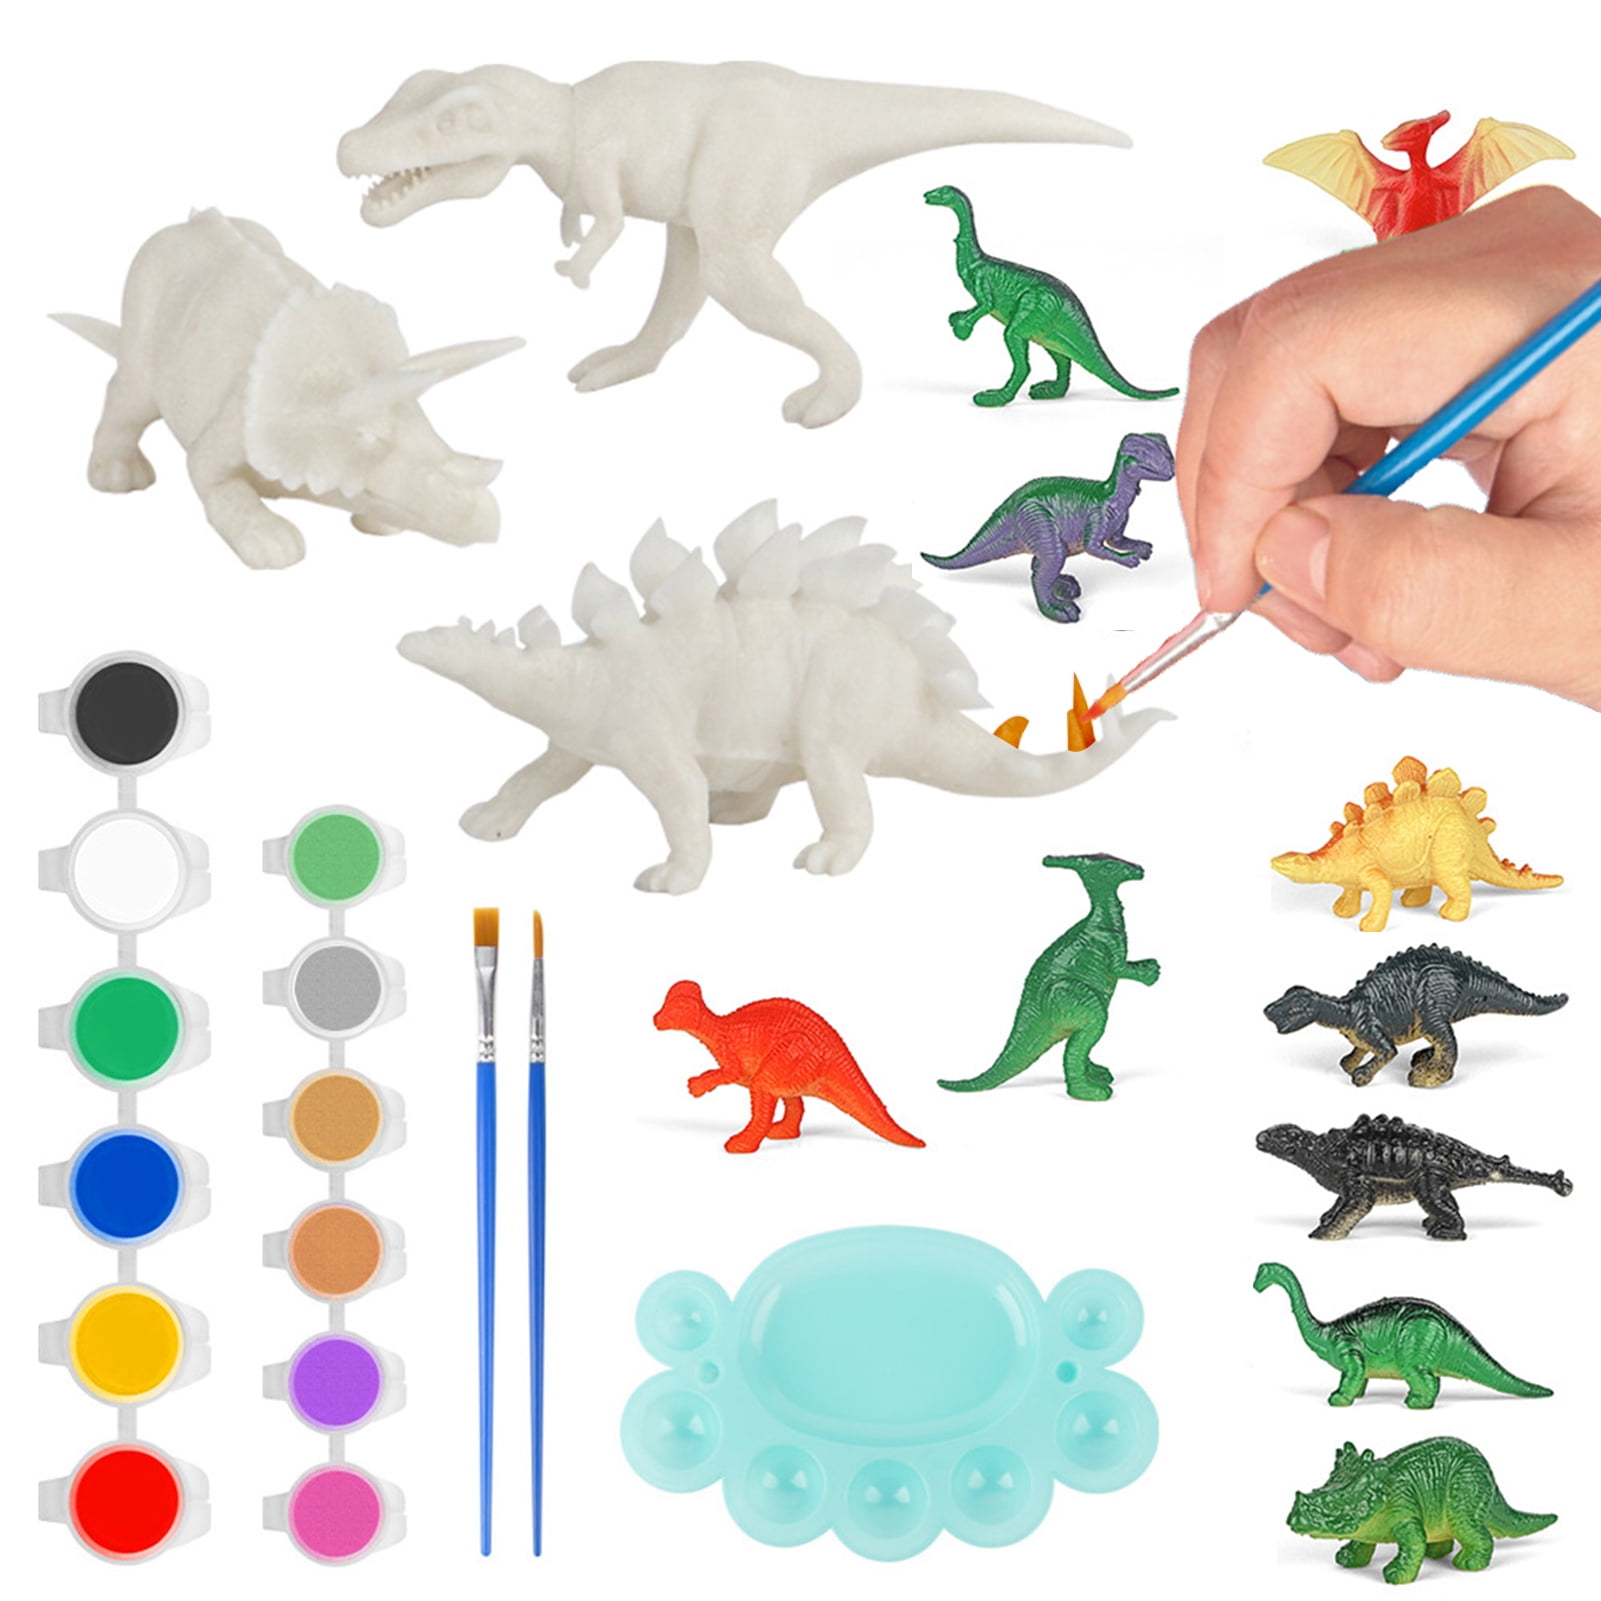 PT001 BESTING 3D Painting Toys Dinosaurs Figurines for Kids DIY Arts Craft and Supplies Set Dinosaur Paint Modeling with Play Mat Education Children 3 Years